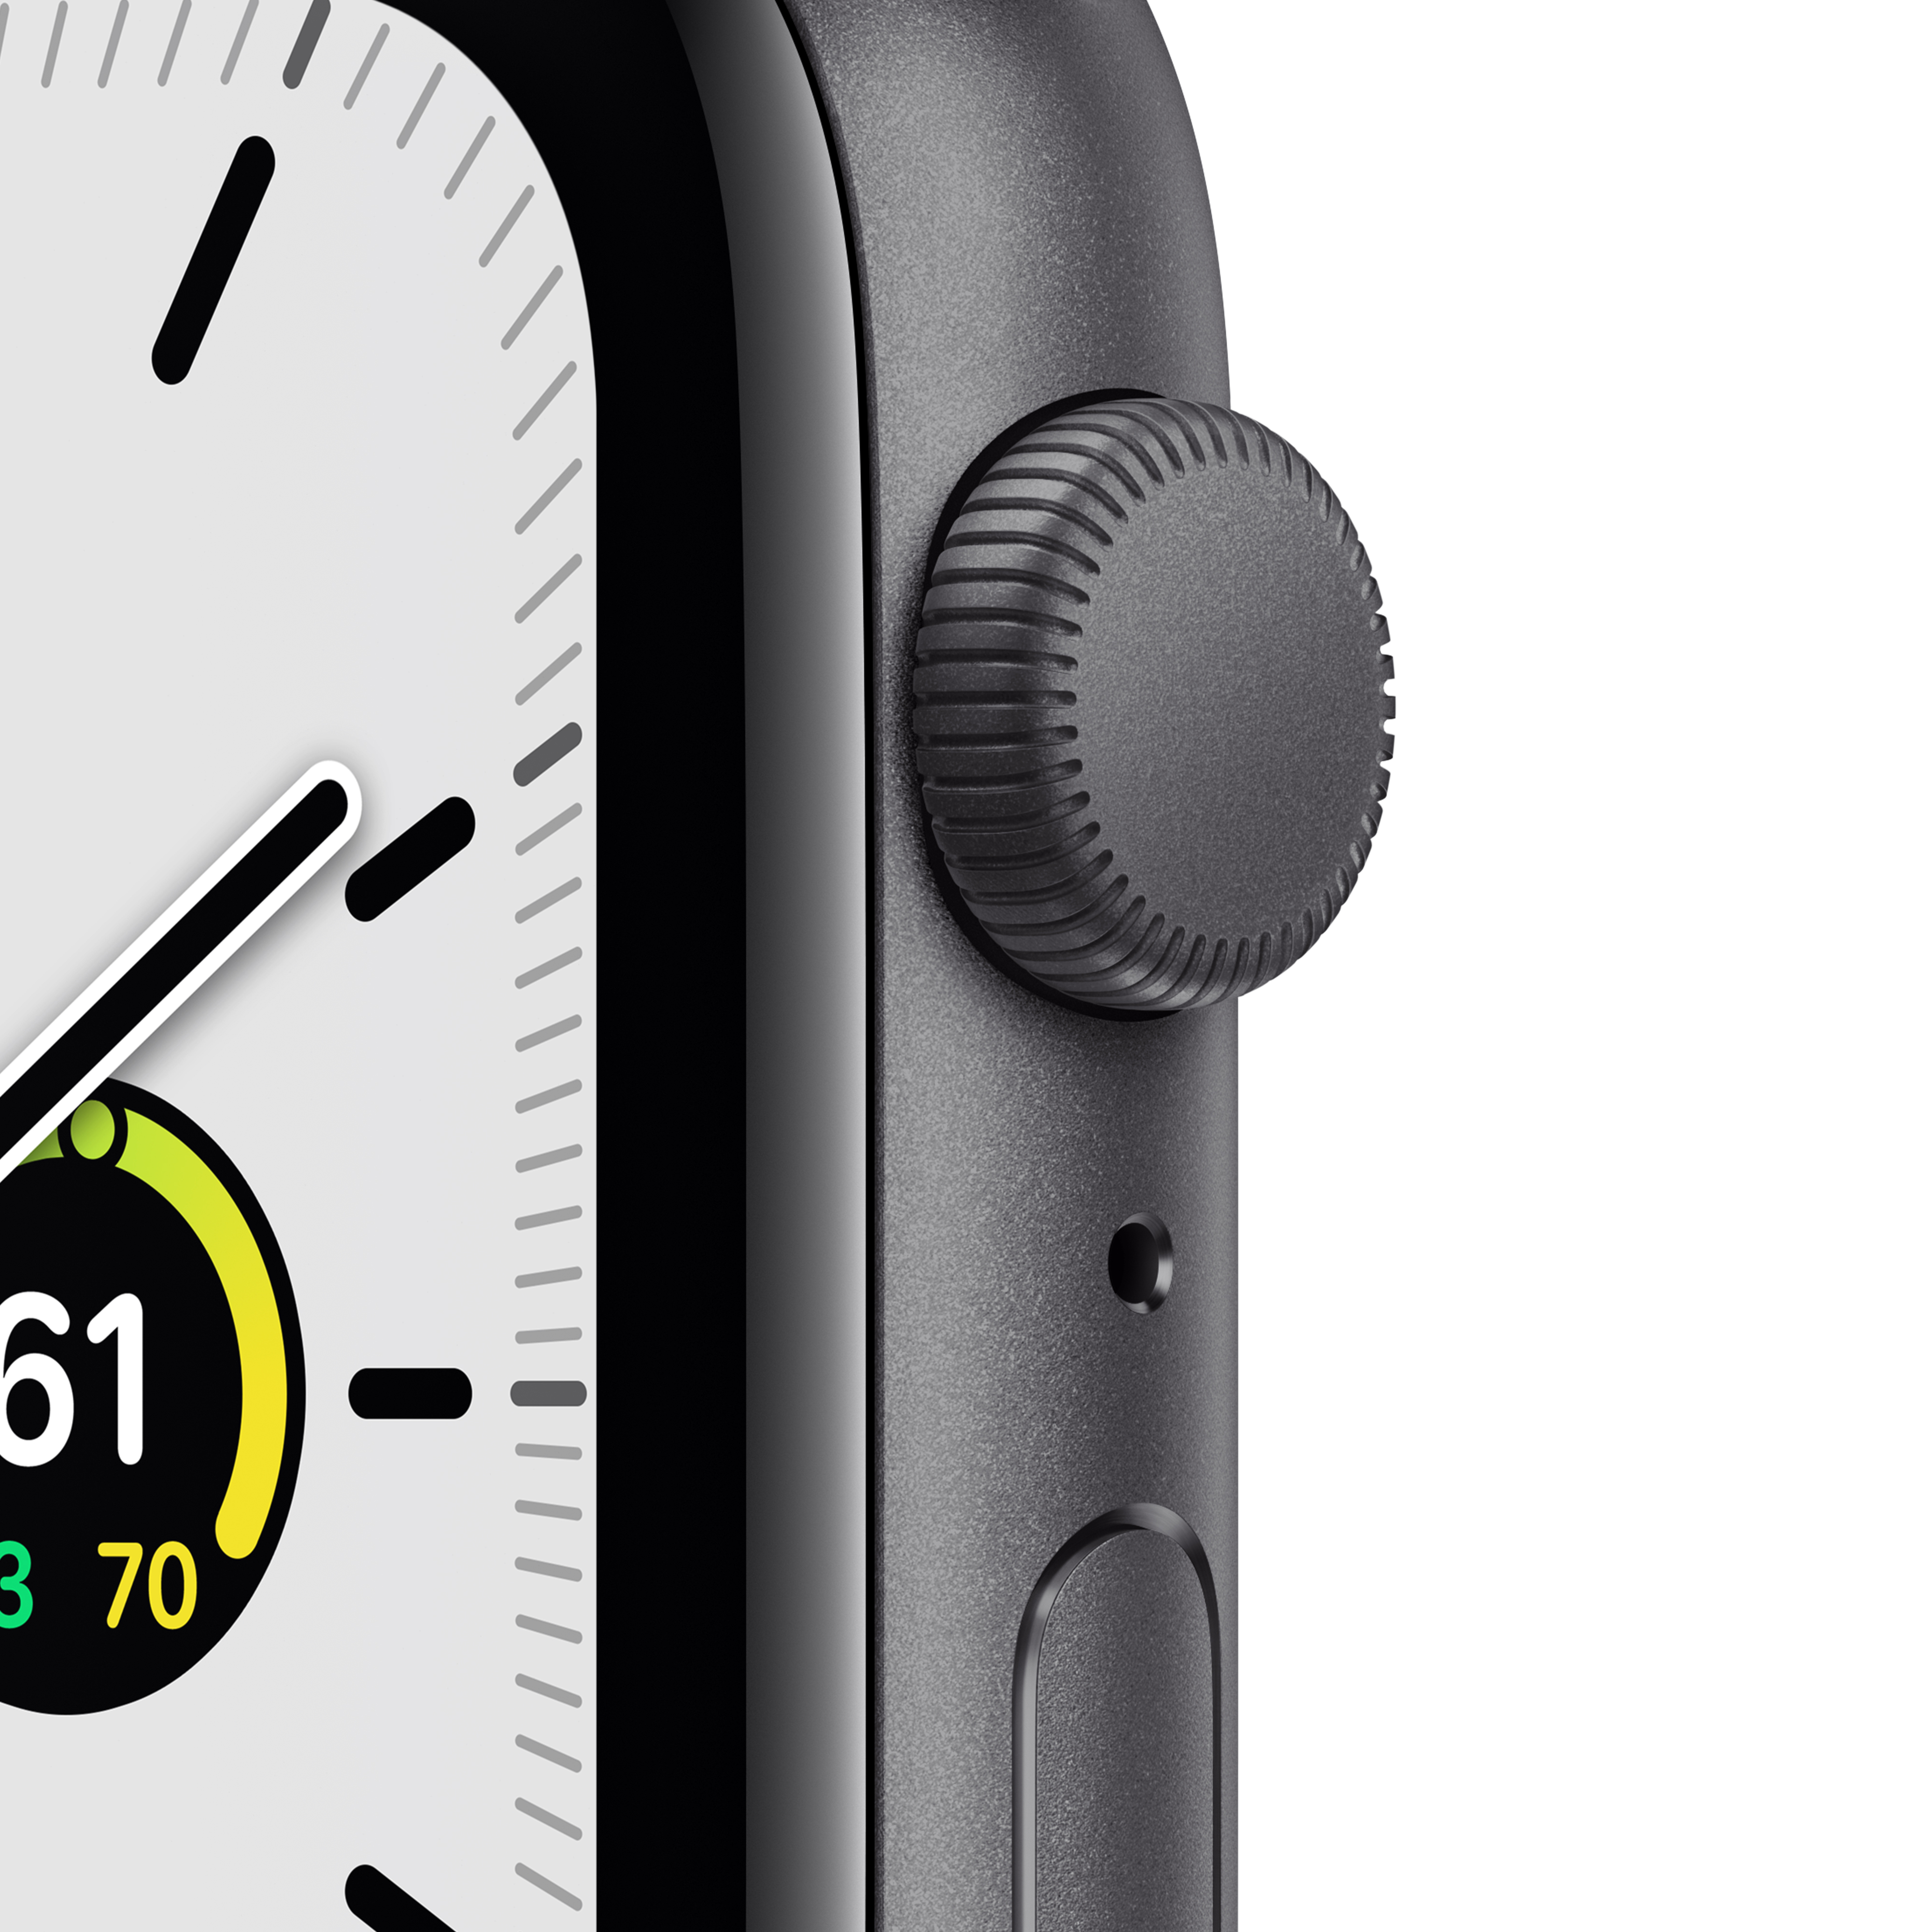 Apple Watch SE (1st Gen) GPS, 44mm Space Gray Aluminum Case with Midnight Sport Band - Regular - image 2 of 9